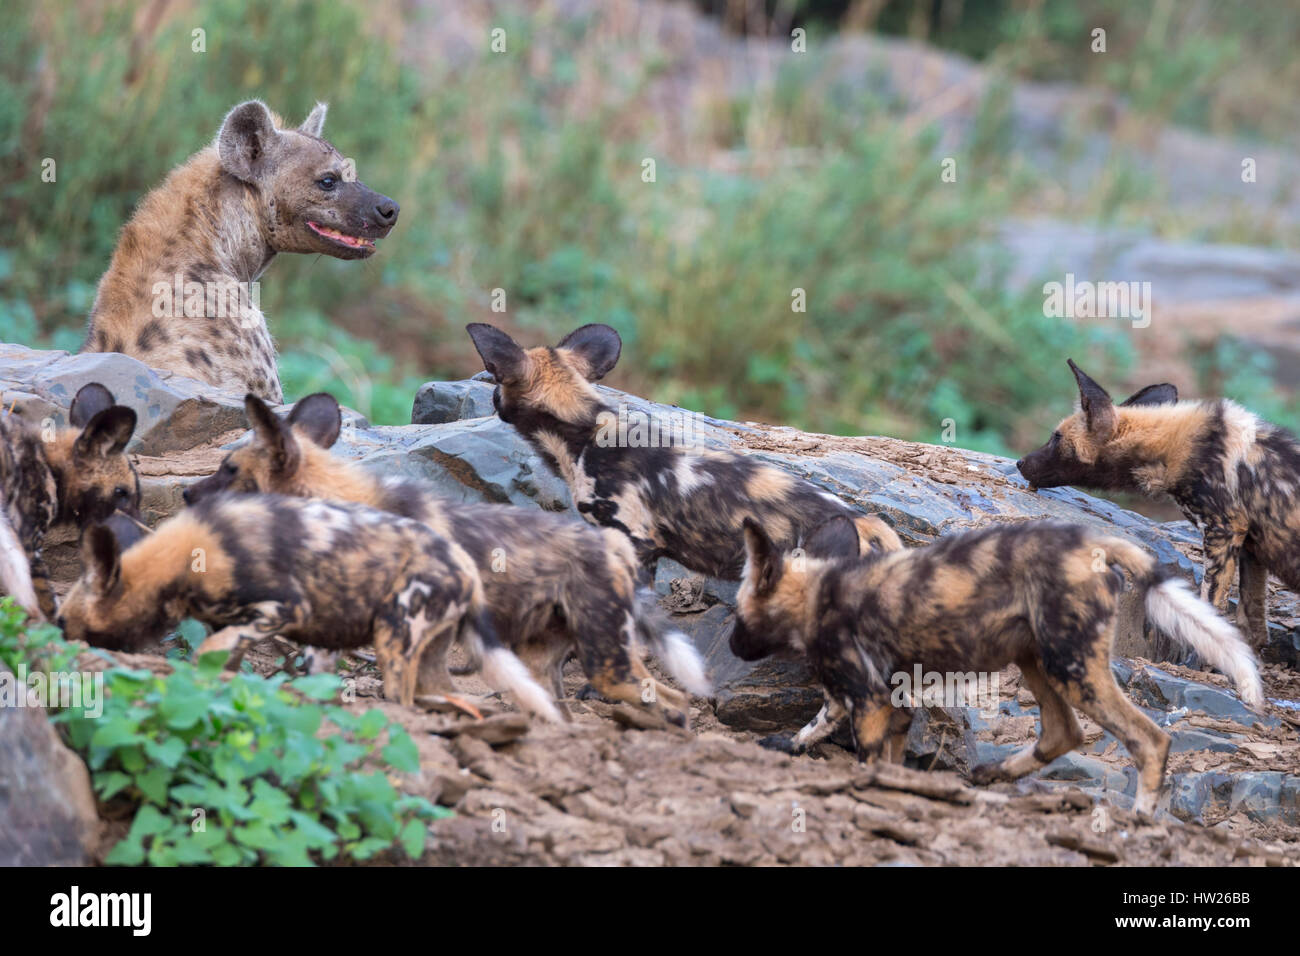 African wild dogs (Lycaon pictus) confronting spotted hyena (Crocuta crocuta), Zimanga private game reserve, KwaZulu-Natal, South Africa, September 20 Stock Photo